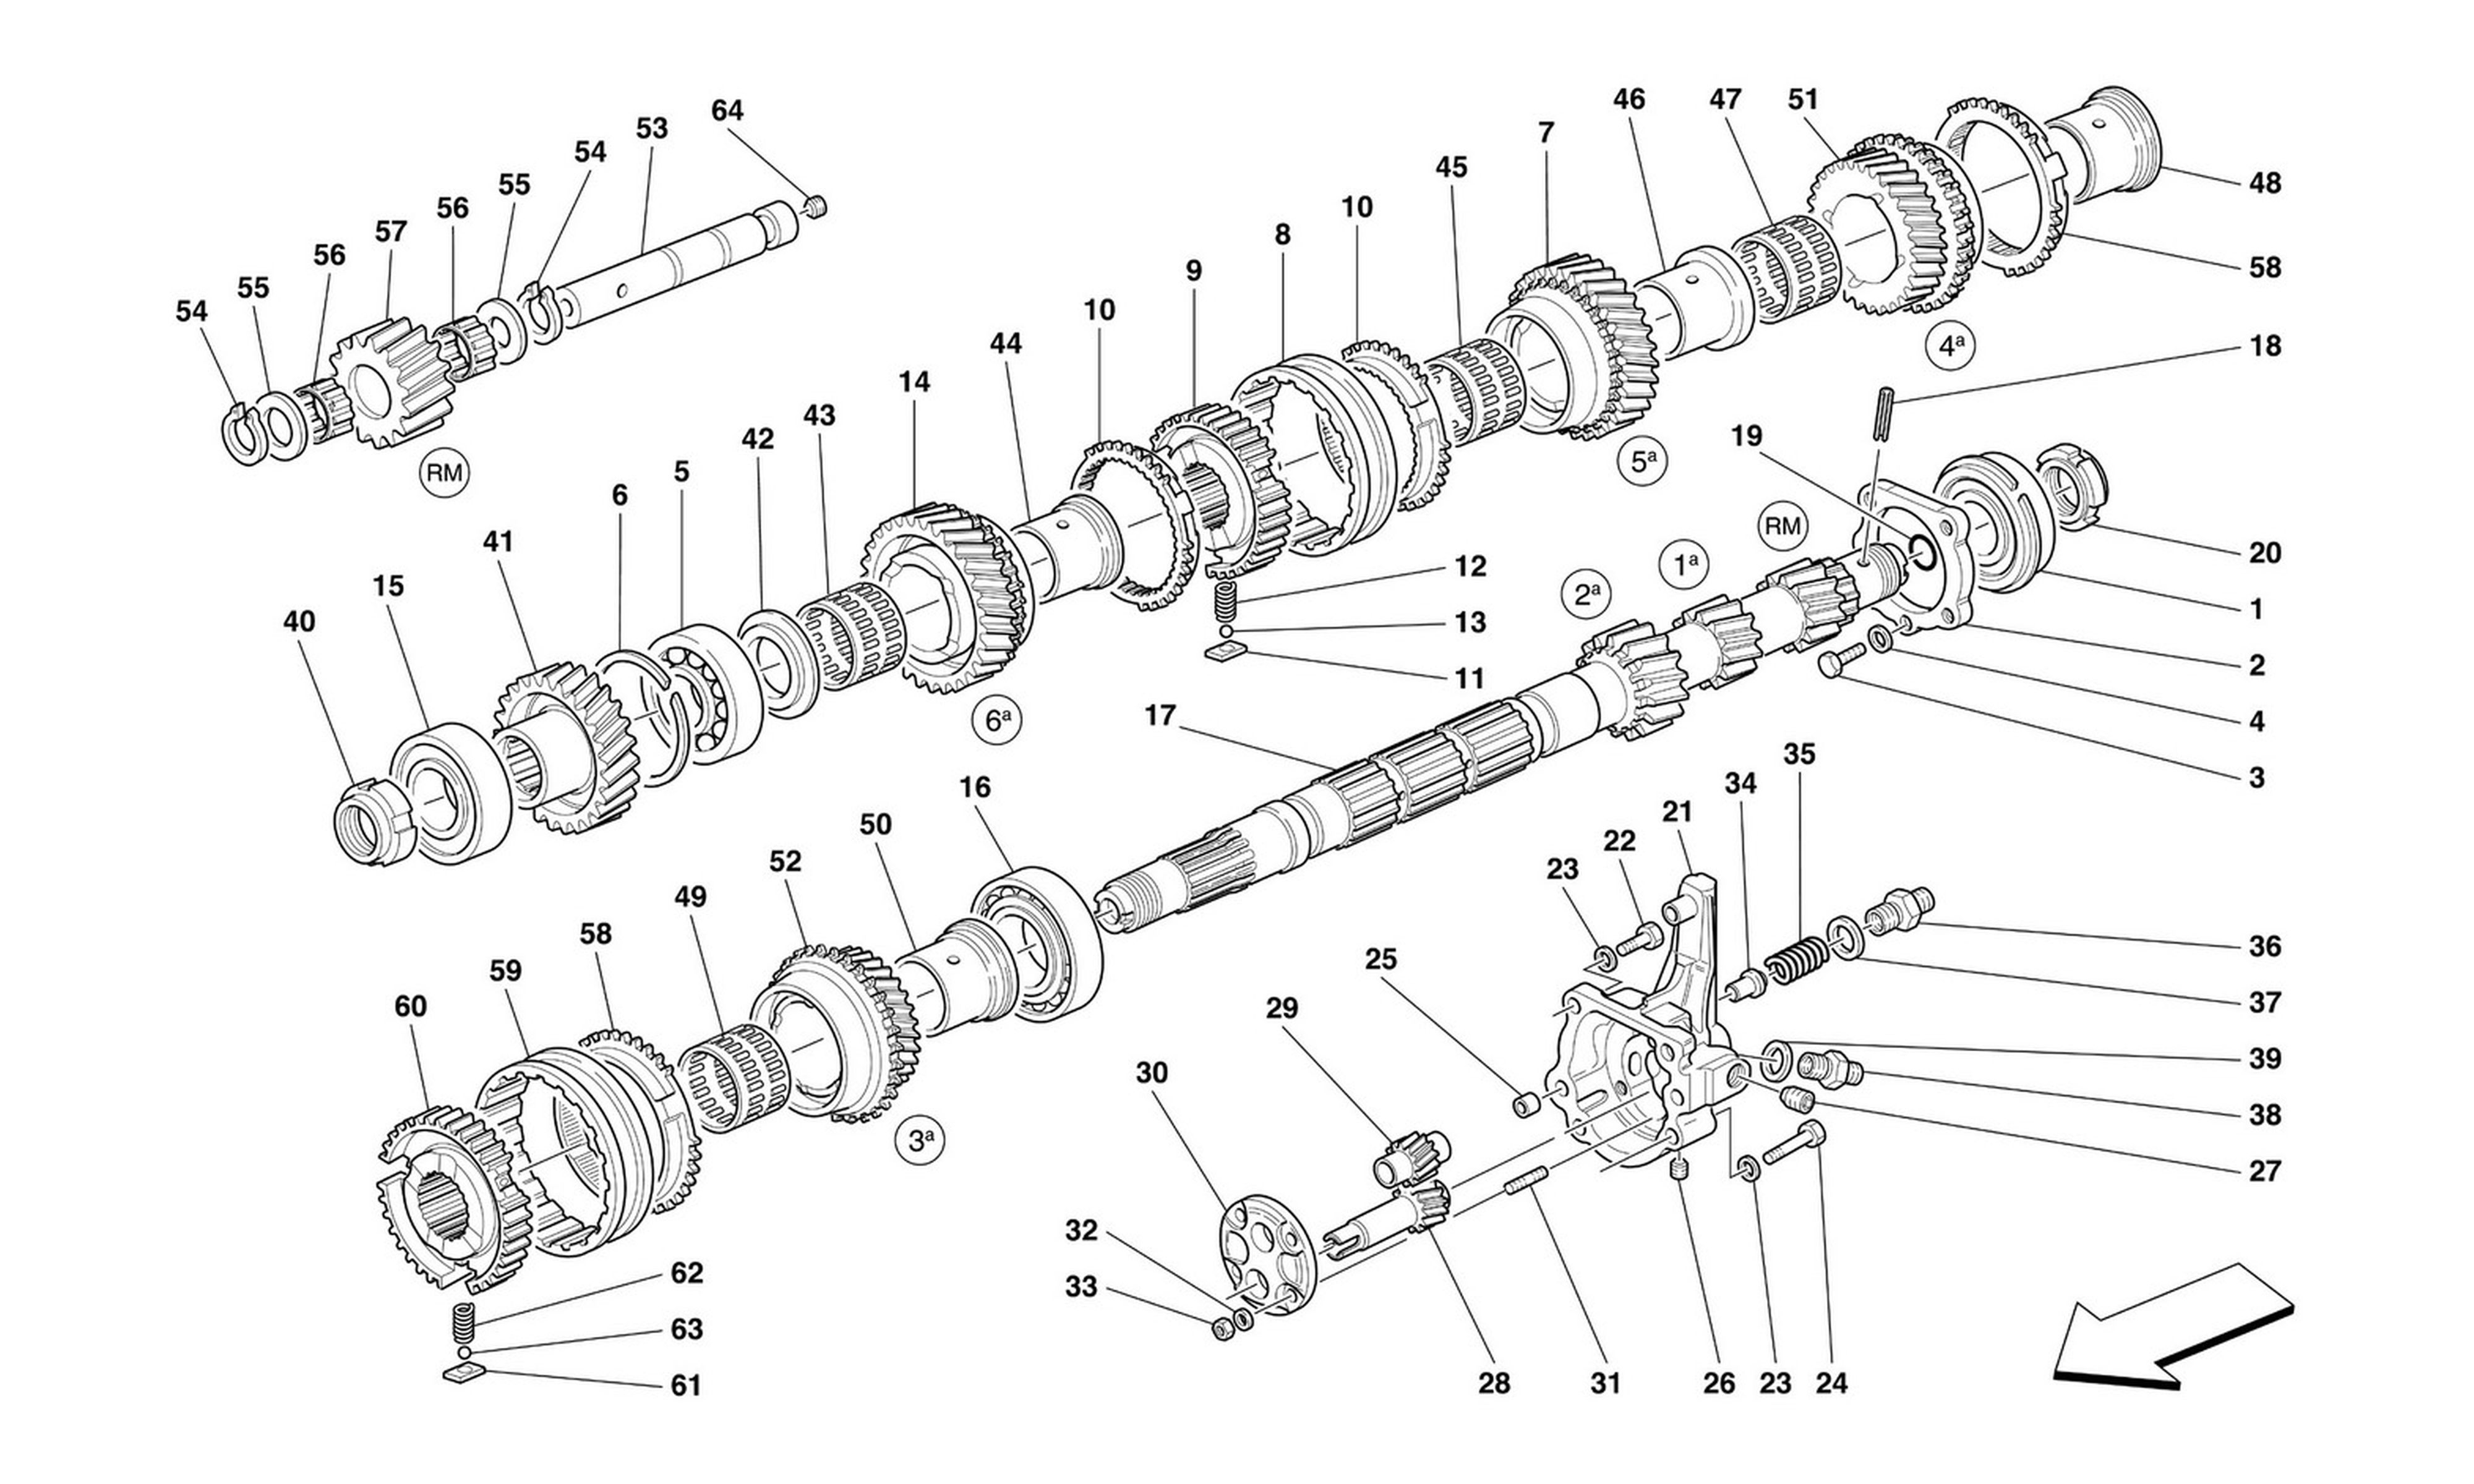 Schematic: Main Shaft Gears And Gearbox Oil Pump -Not For 456M Gta